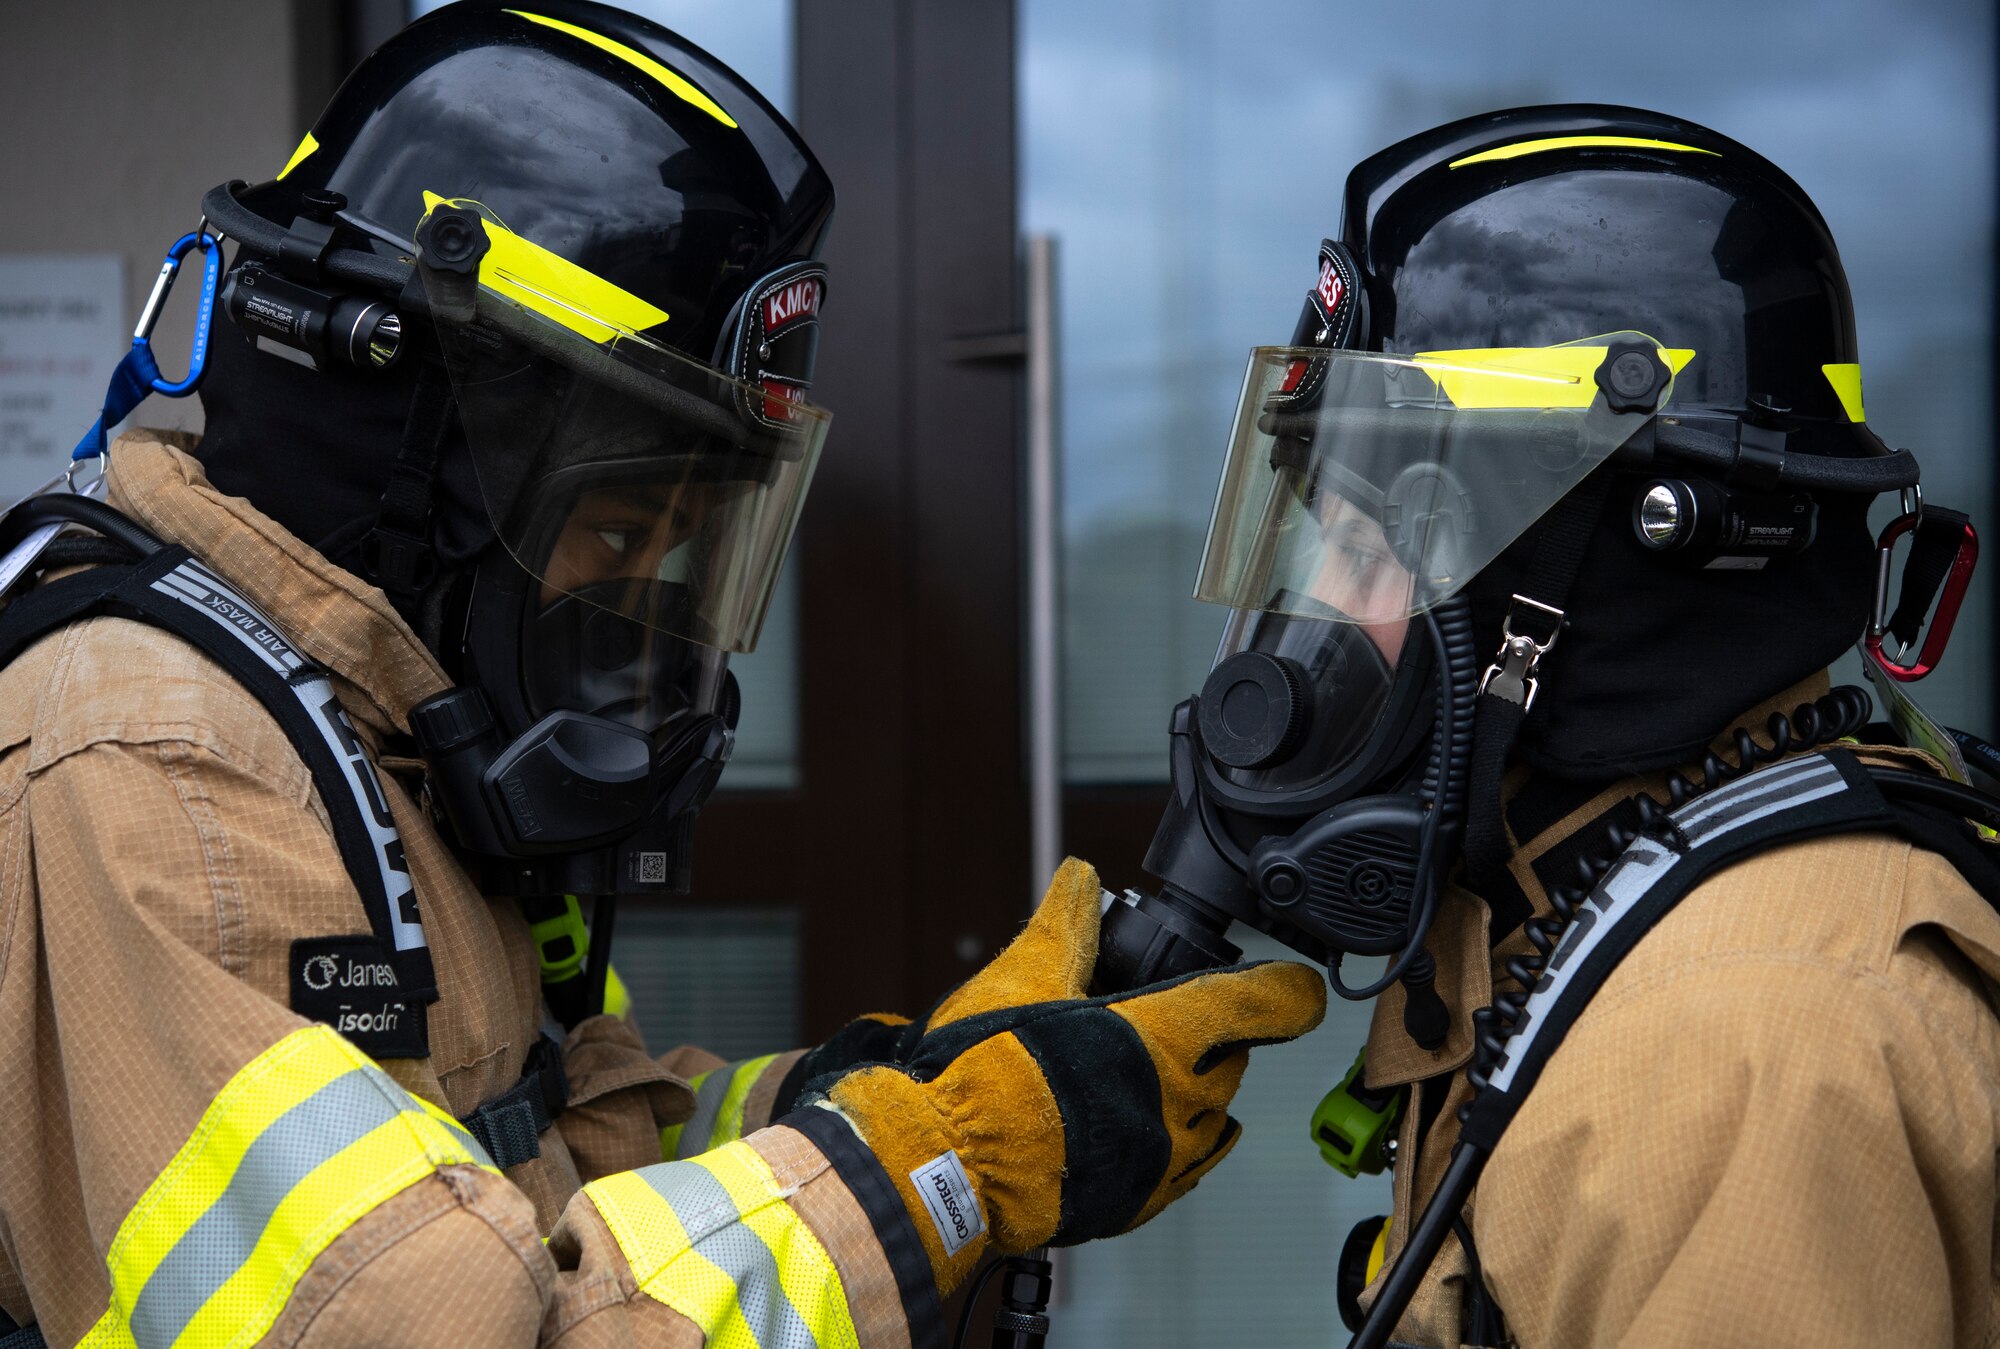 Two firefighters simulate a buddy check in their fire fighting equipment